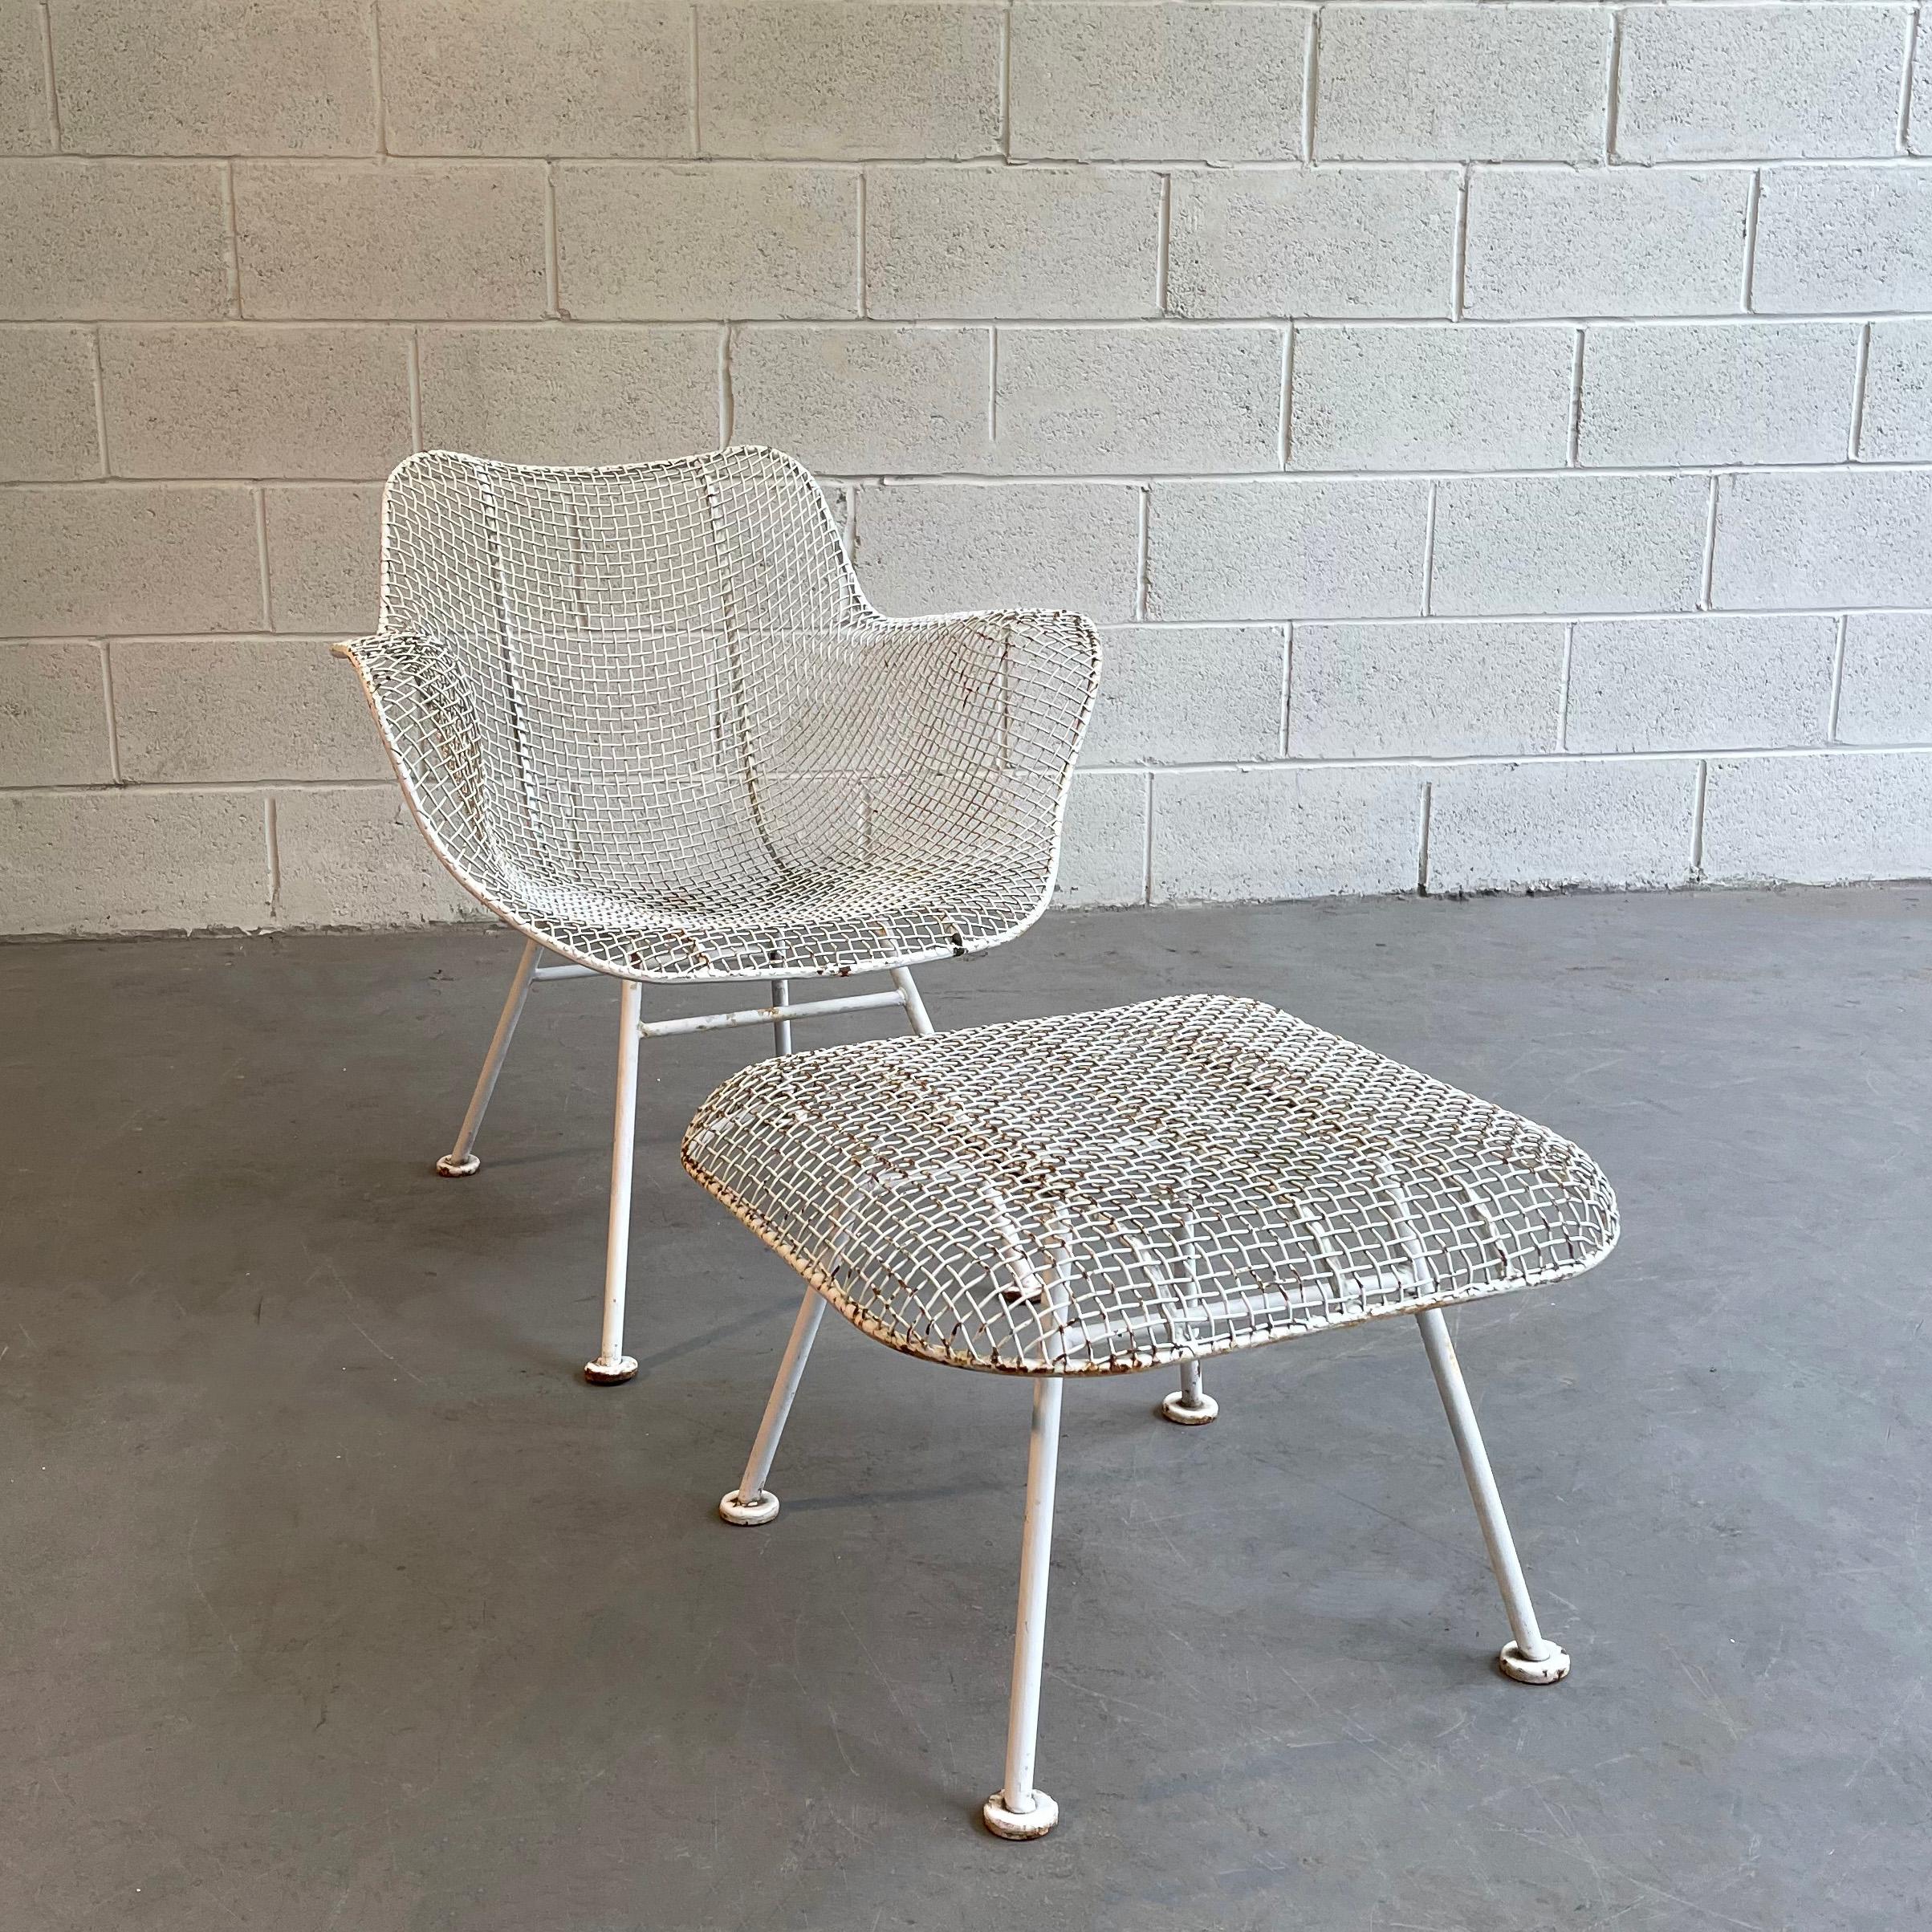 Mid-Century Modern, outdoor, patio, powder-coated, steel mesh and wrought iron armchair with ottoman by Russell Woodard, Sculptura. The ottoman measures 21 width x 21 depth x 13 inches height.